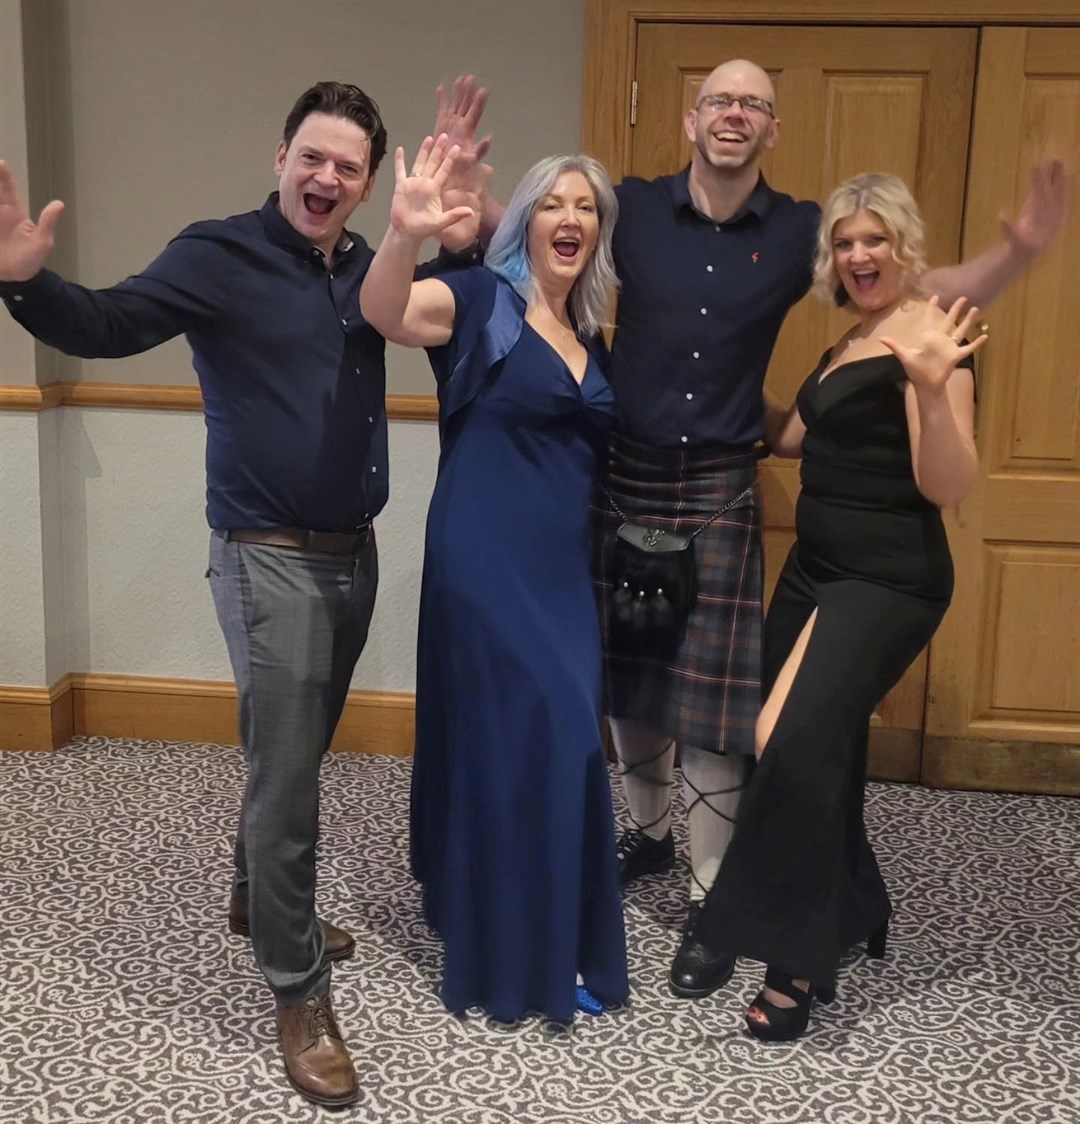 Some of the Strictly Inverness dancers at the masquerade ball: Craig Watson, Ruth Mason, Andy Dixon and Jenna Christie.